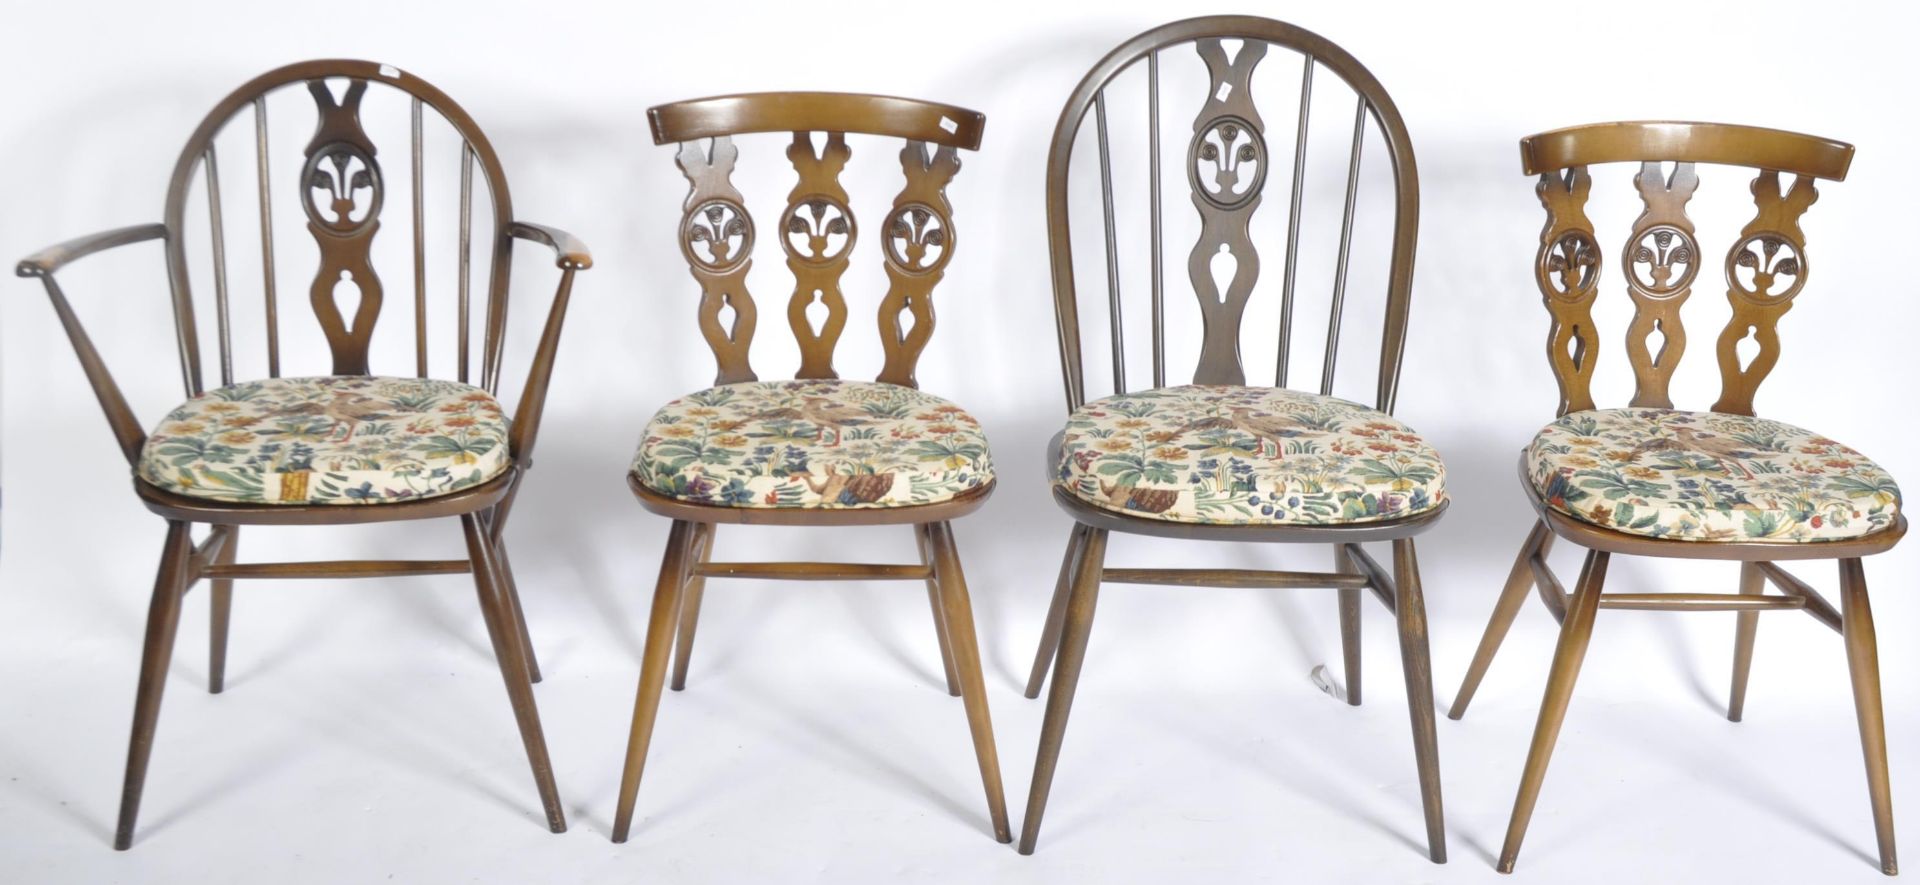 ERCOL OLD COLONIAL DINING TABLE WITH FLEUR DE LYS CHAIRS - Image 5 of 6